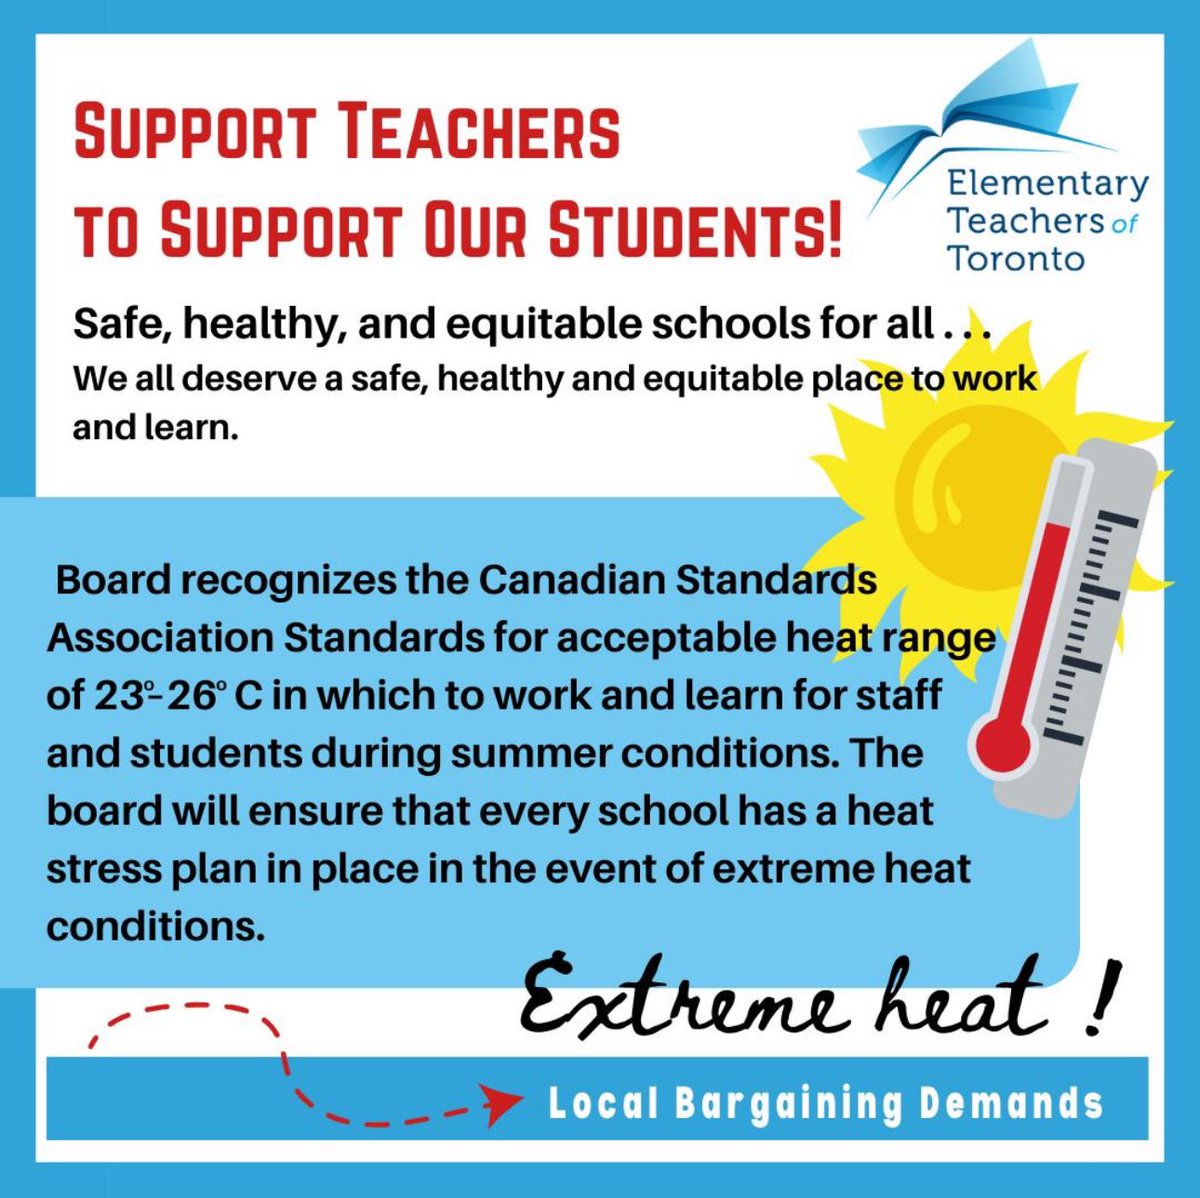 Once again teachers and students are having to deal with extreme heat in the classroom. We continue to push the board to ensure that every school has a heat stress plan in place in the event of extreme heat conditions like today